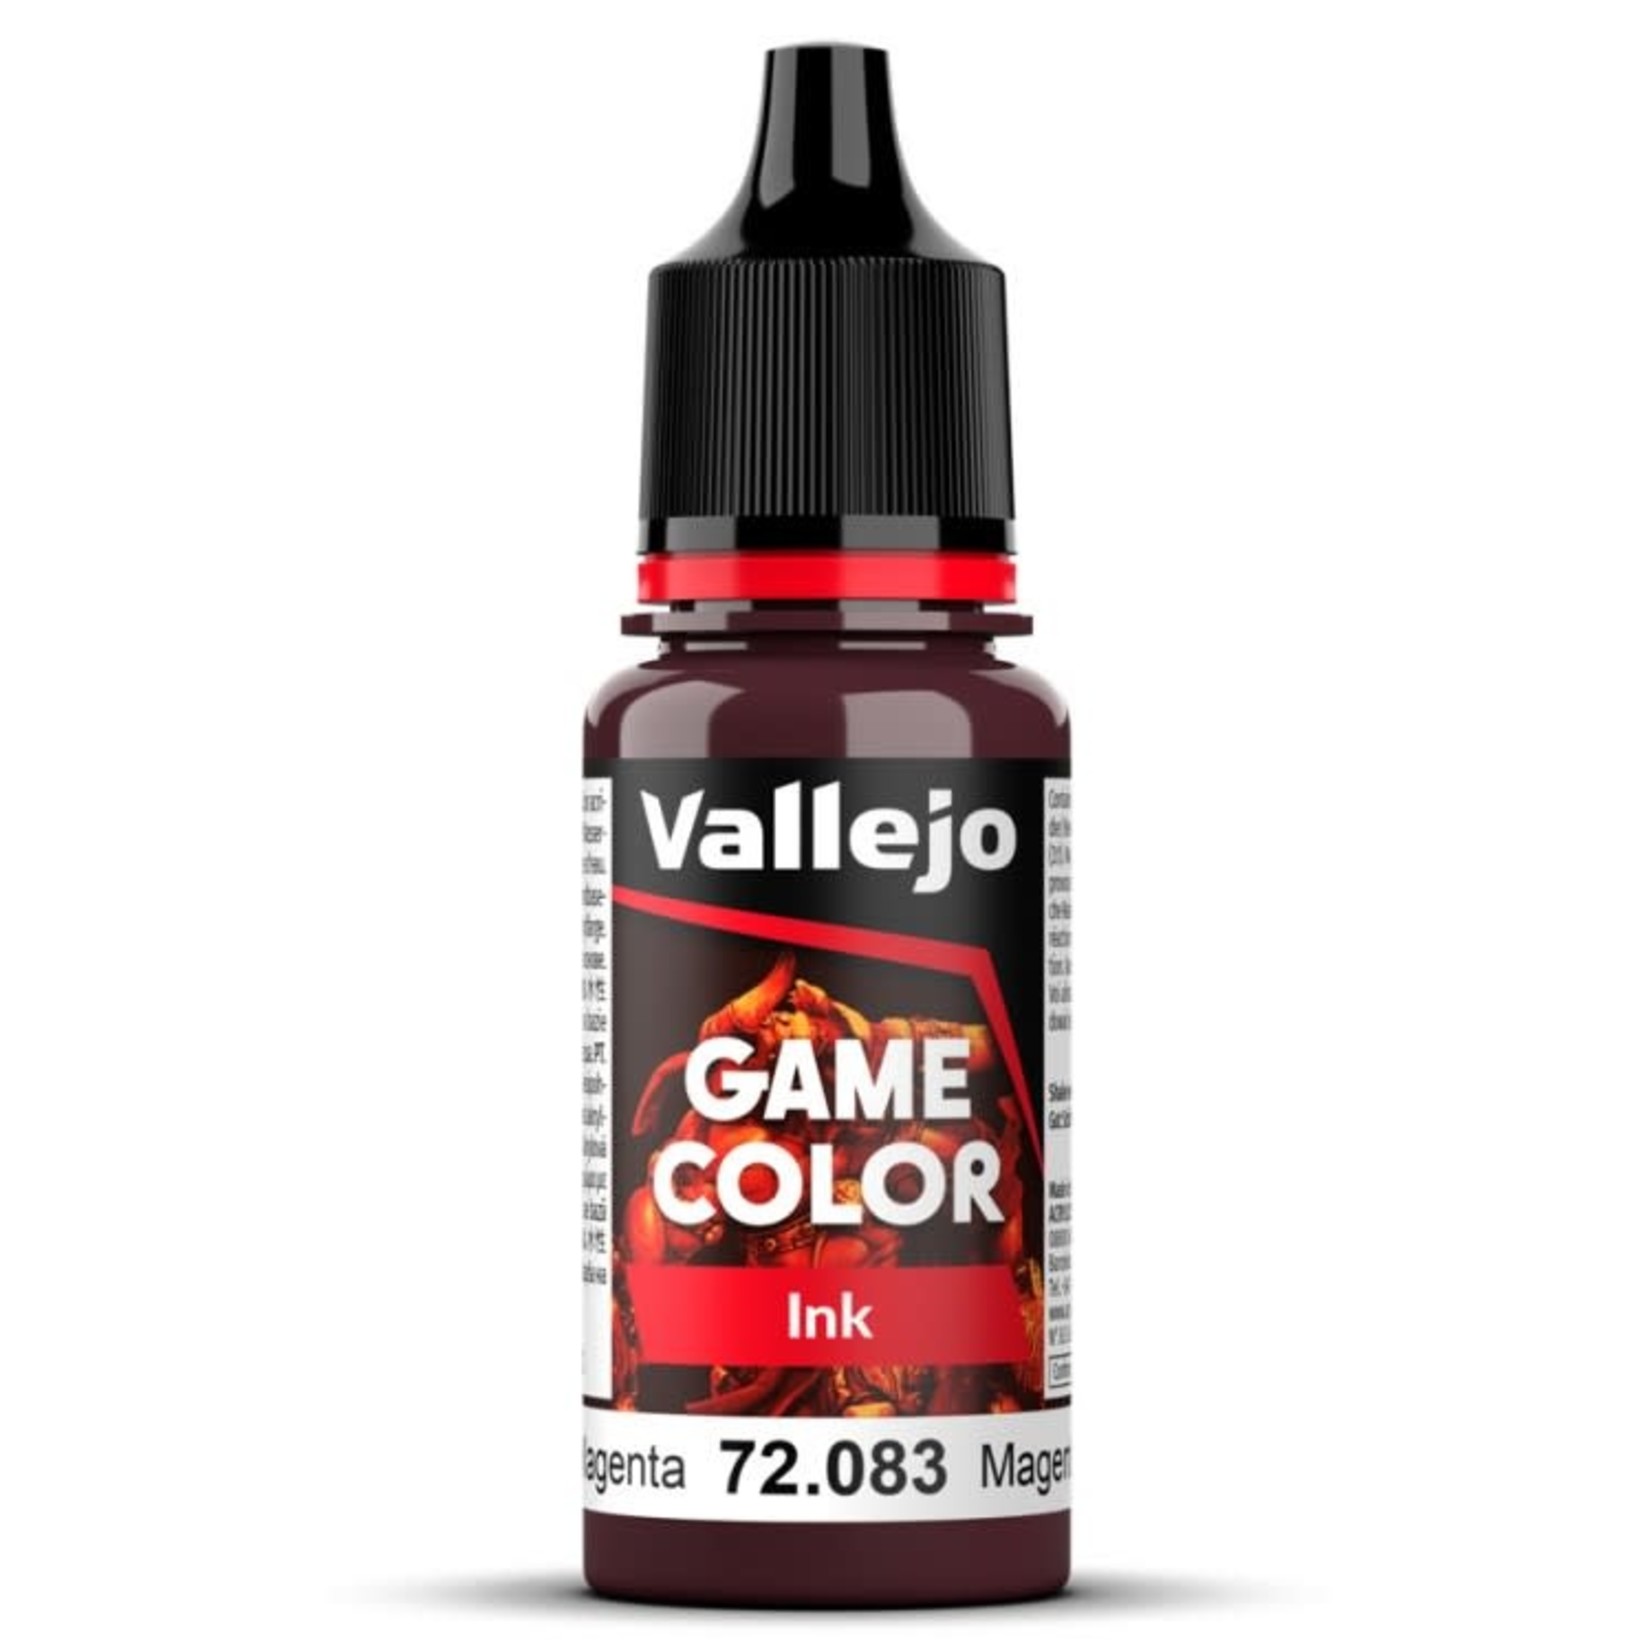 Vallejo Paint: Game Color, Ink (Magenta)